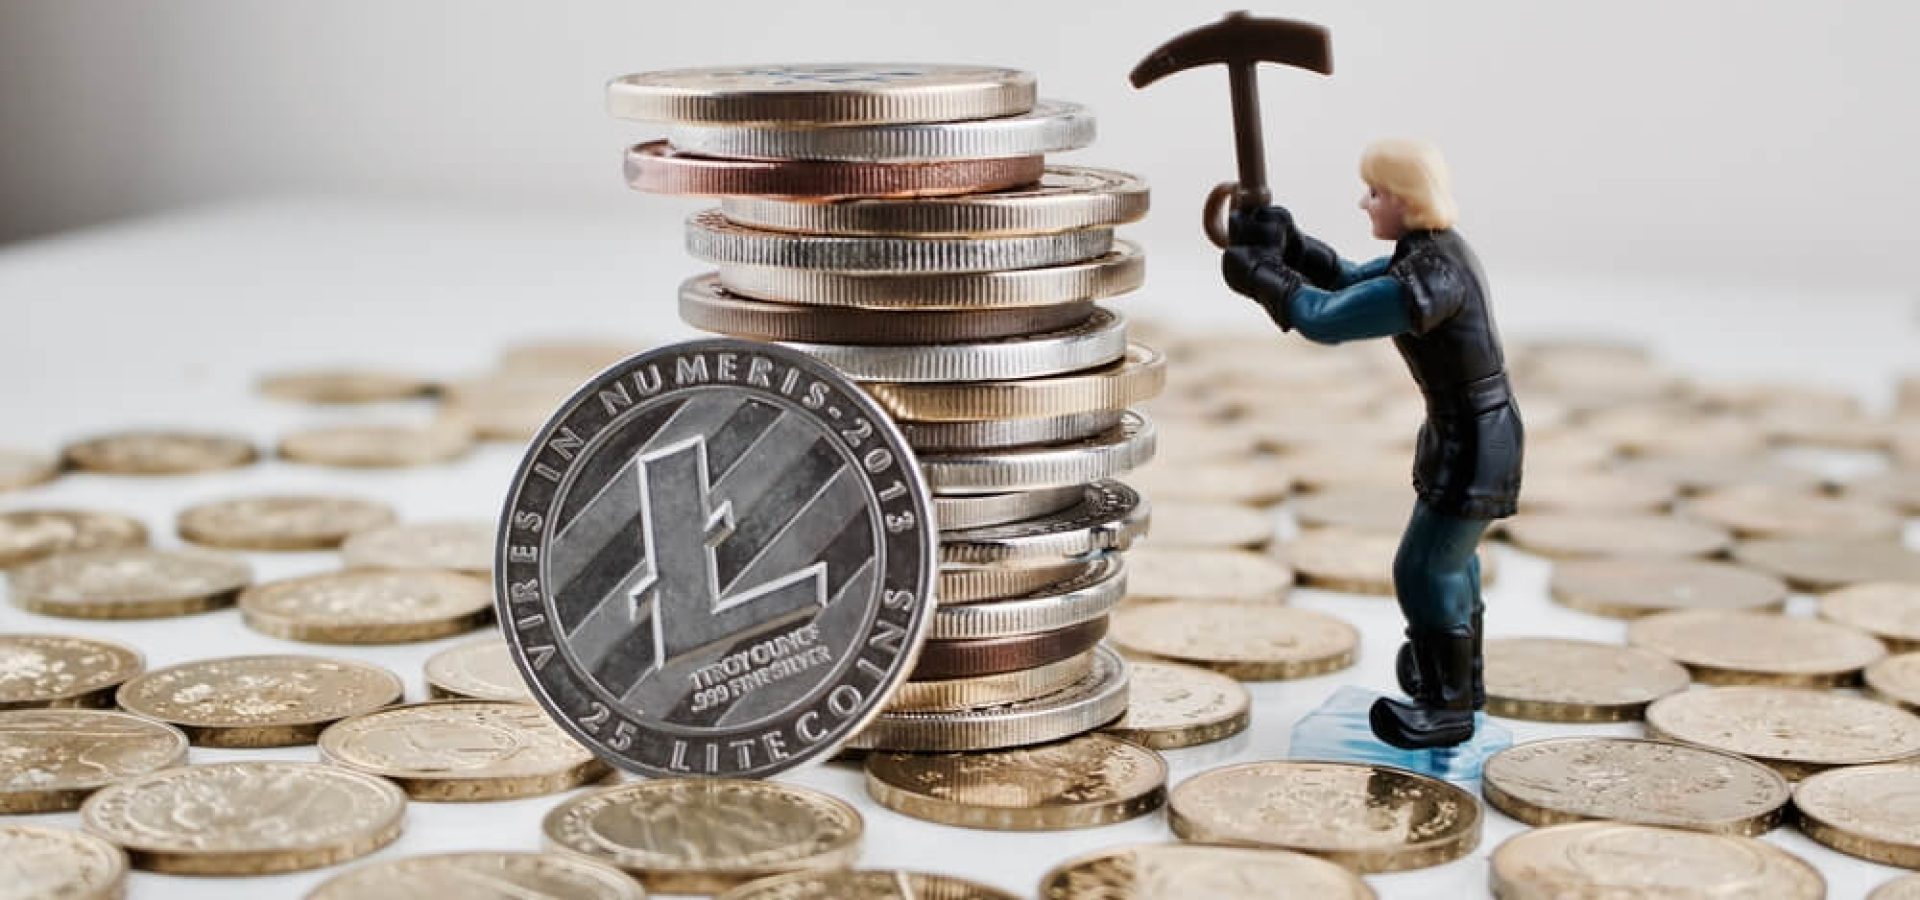 Litecoin price was volatile in the past few days before soaring on Wednesday